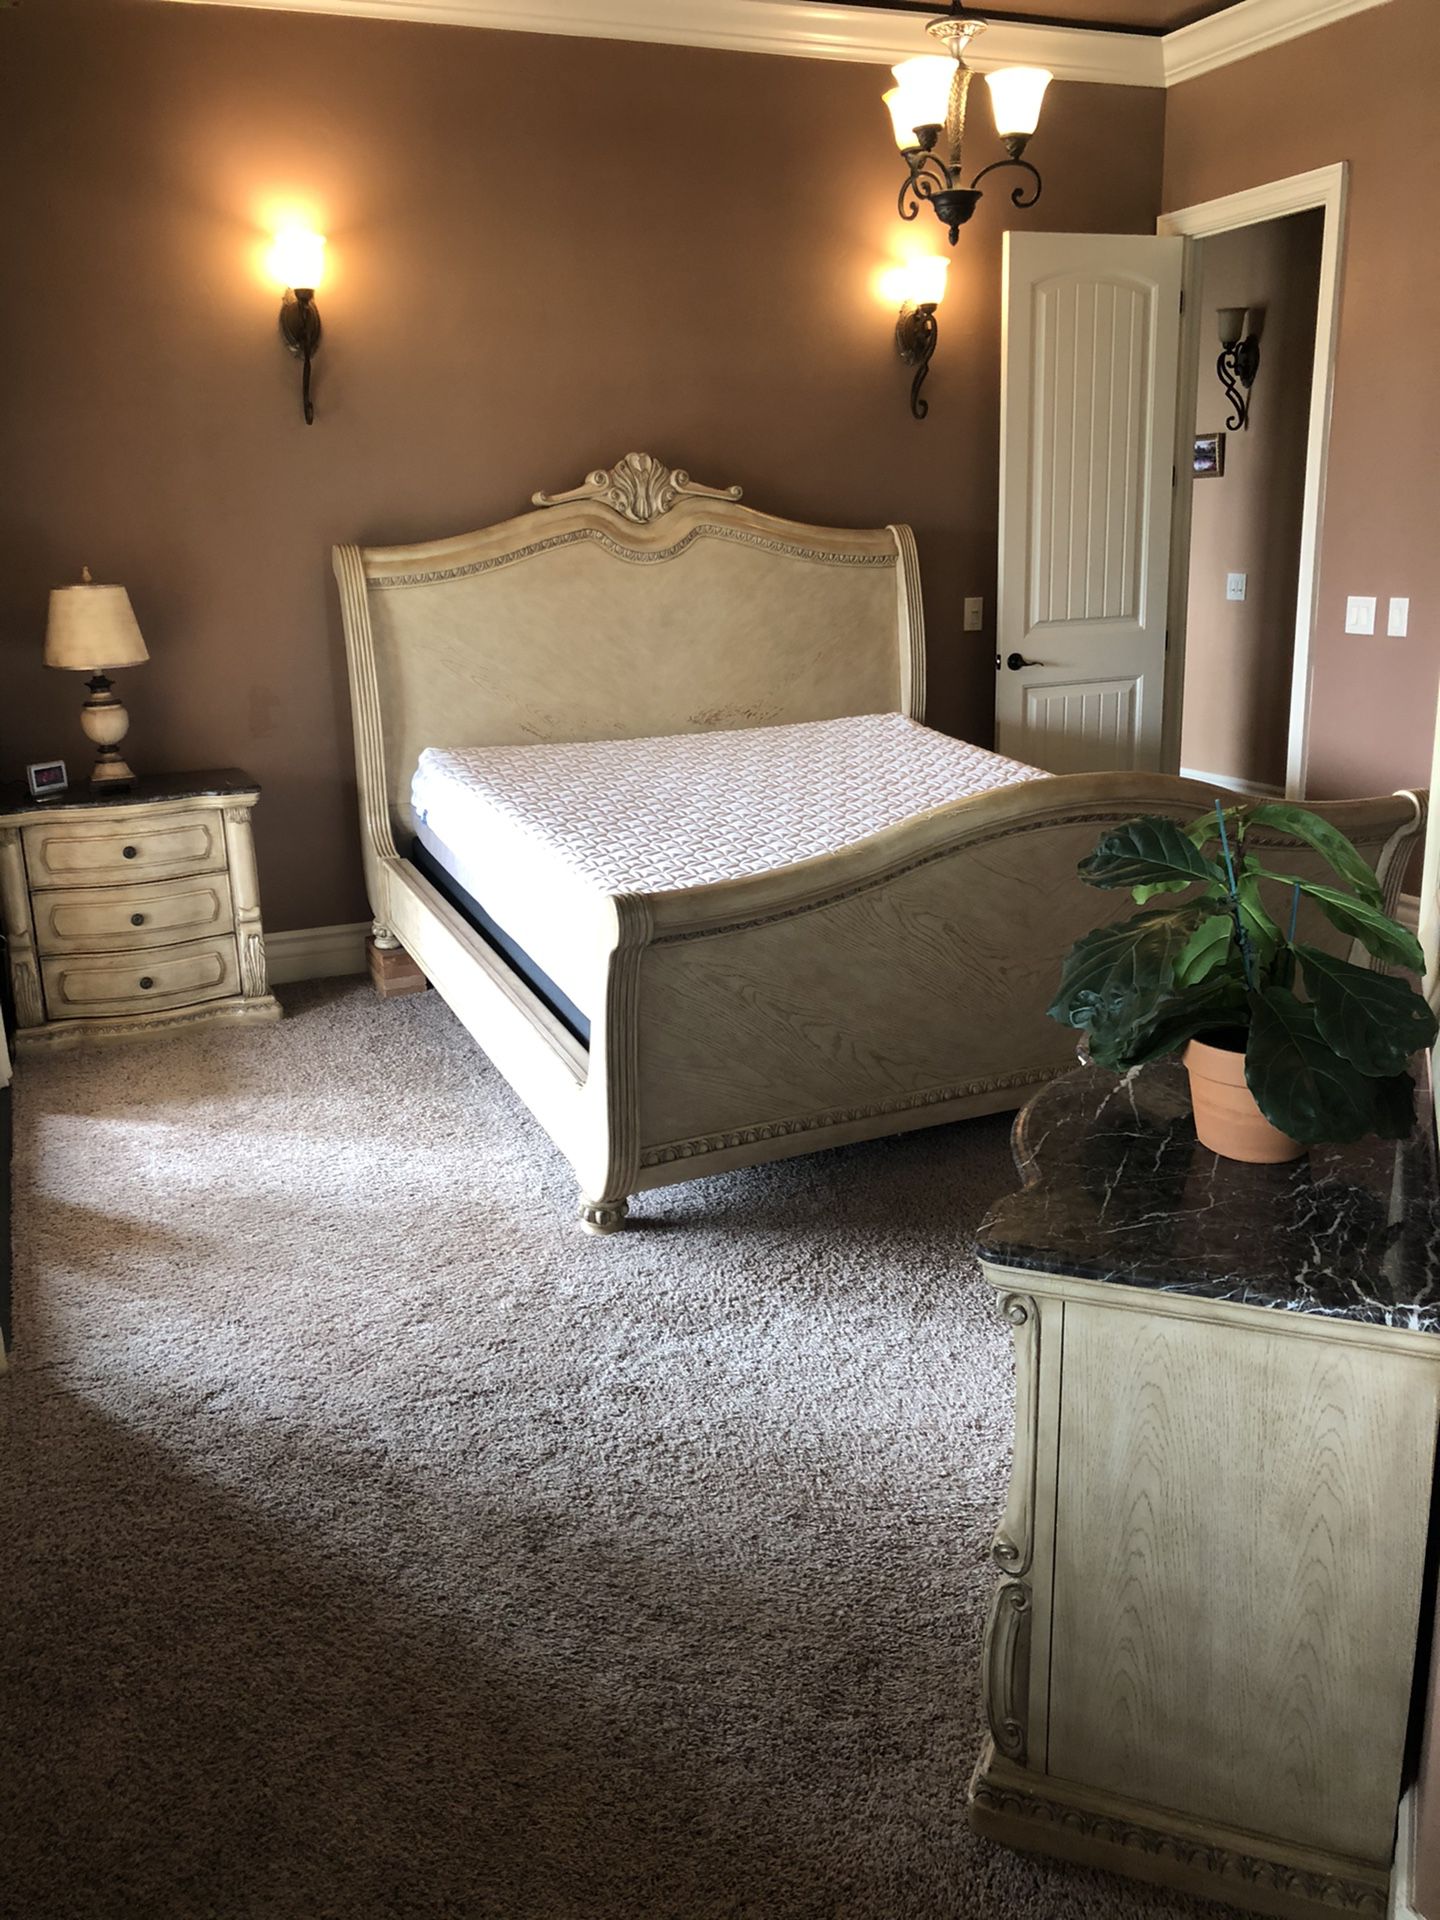 Cal King bed, bedroom set, 2 marble-top nightstands, matching mirror. Solid wood, sturdy, nicely built frame. Mattress not included.